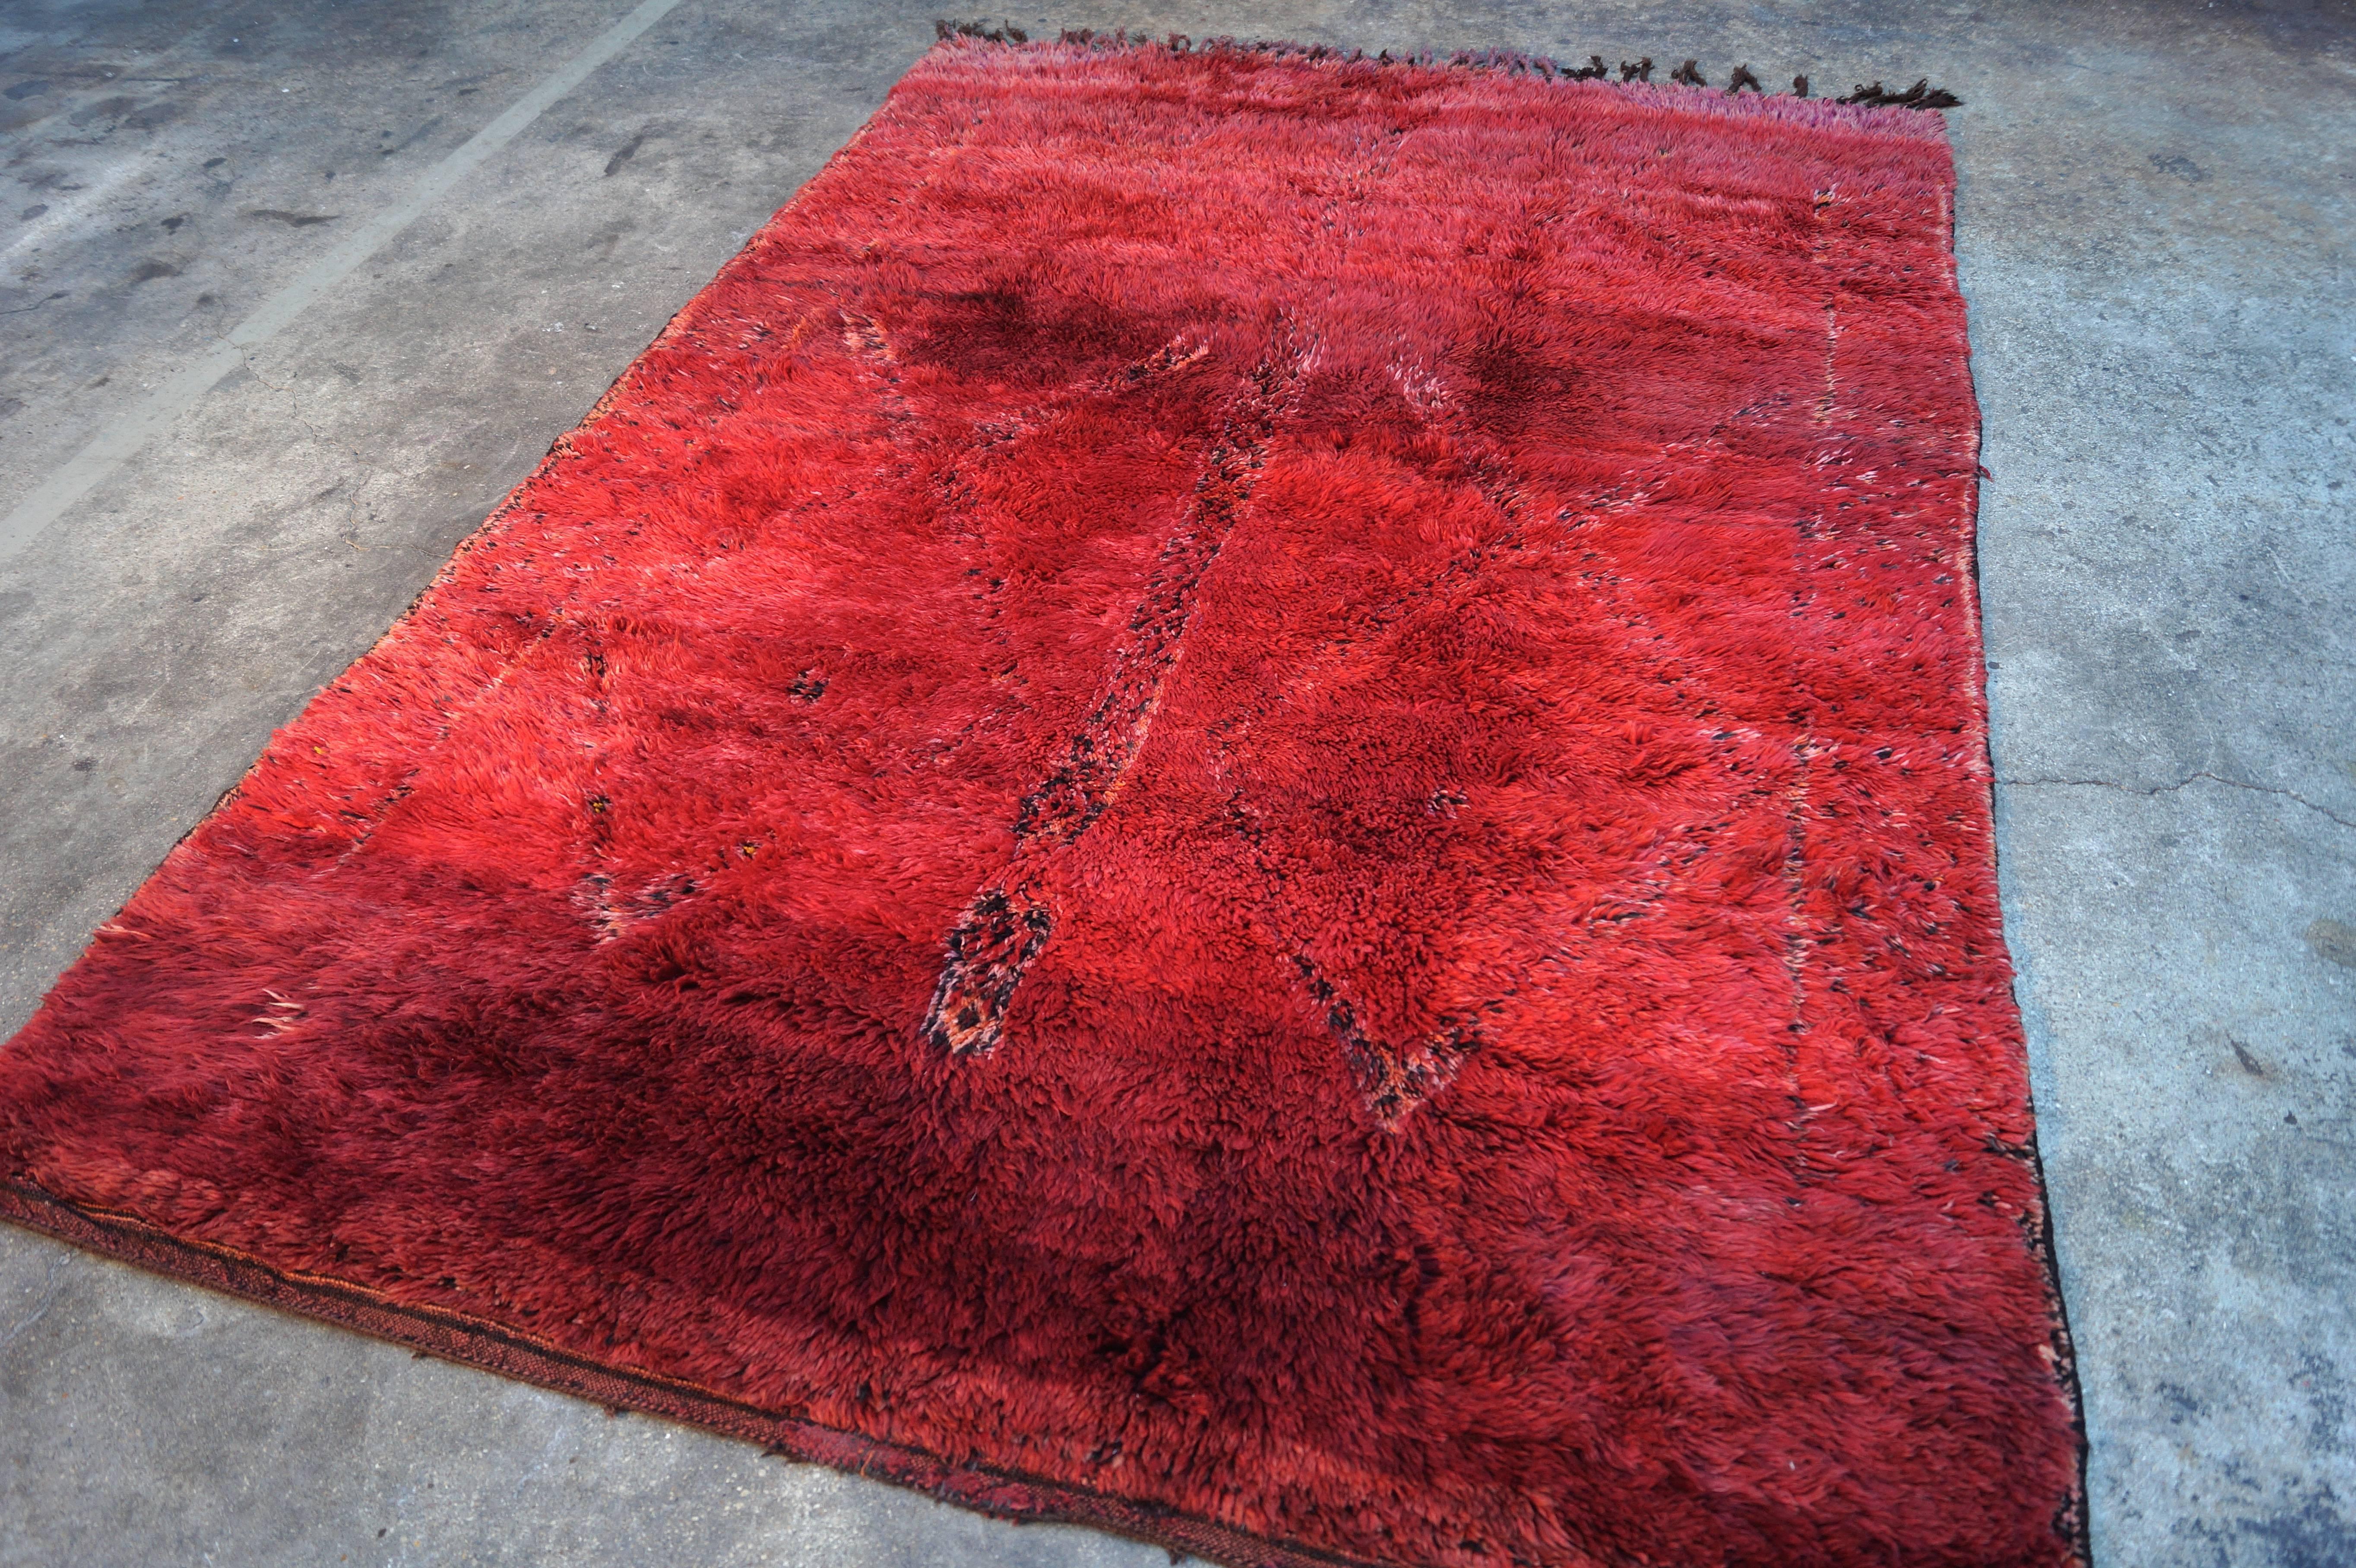 Vintage Moroccan rug
From Middle Atlas, probably Beni Mguild Tribe
Hand-knotted wool
100% wool
circa 1970.